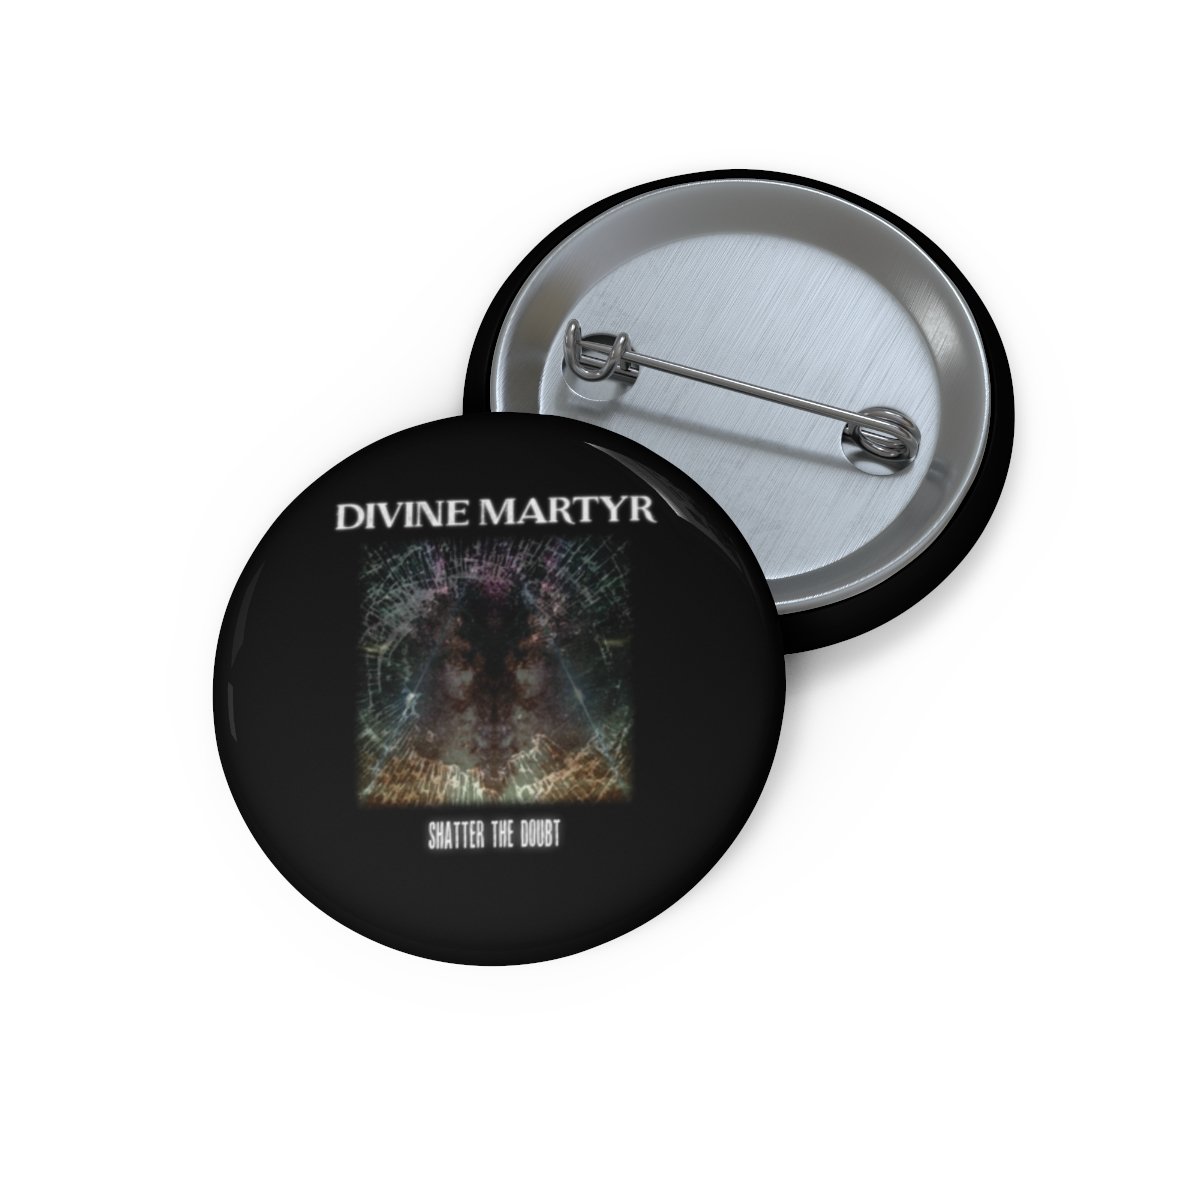 Divine Martyr – Shatter The Doubt Pin Buttons